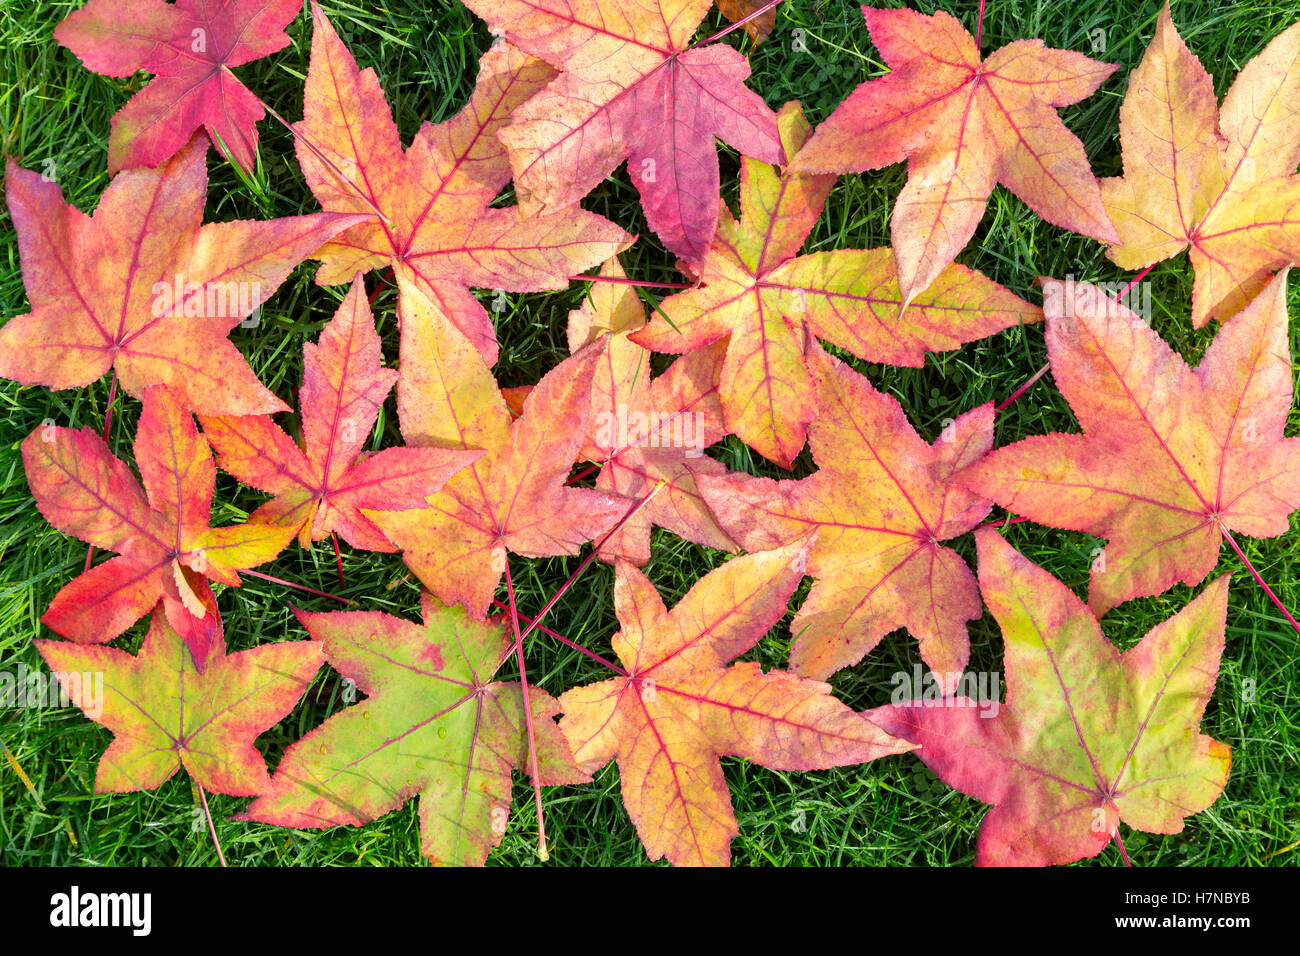 Many colorful fall acer leaves on green grass outside Stock Photo